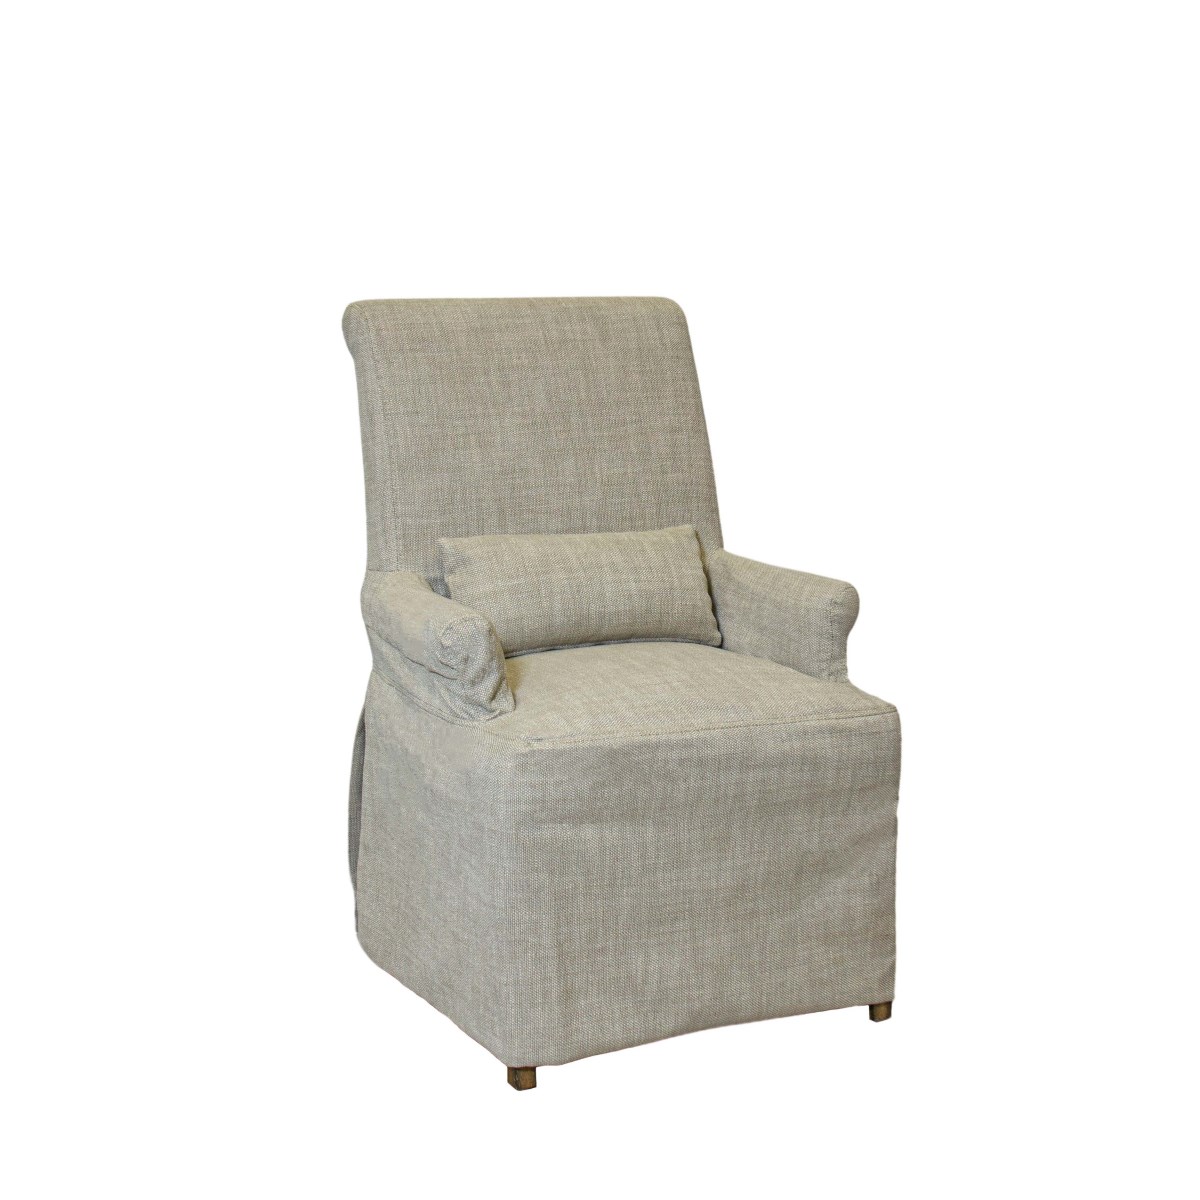 Synergy Scottsdale Slipcover Dining Arm Chair